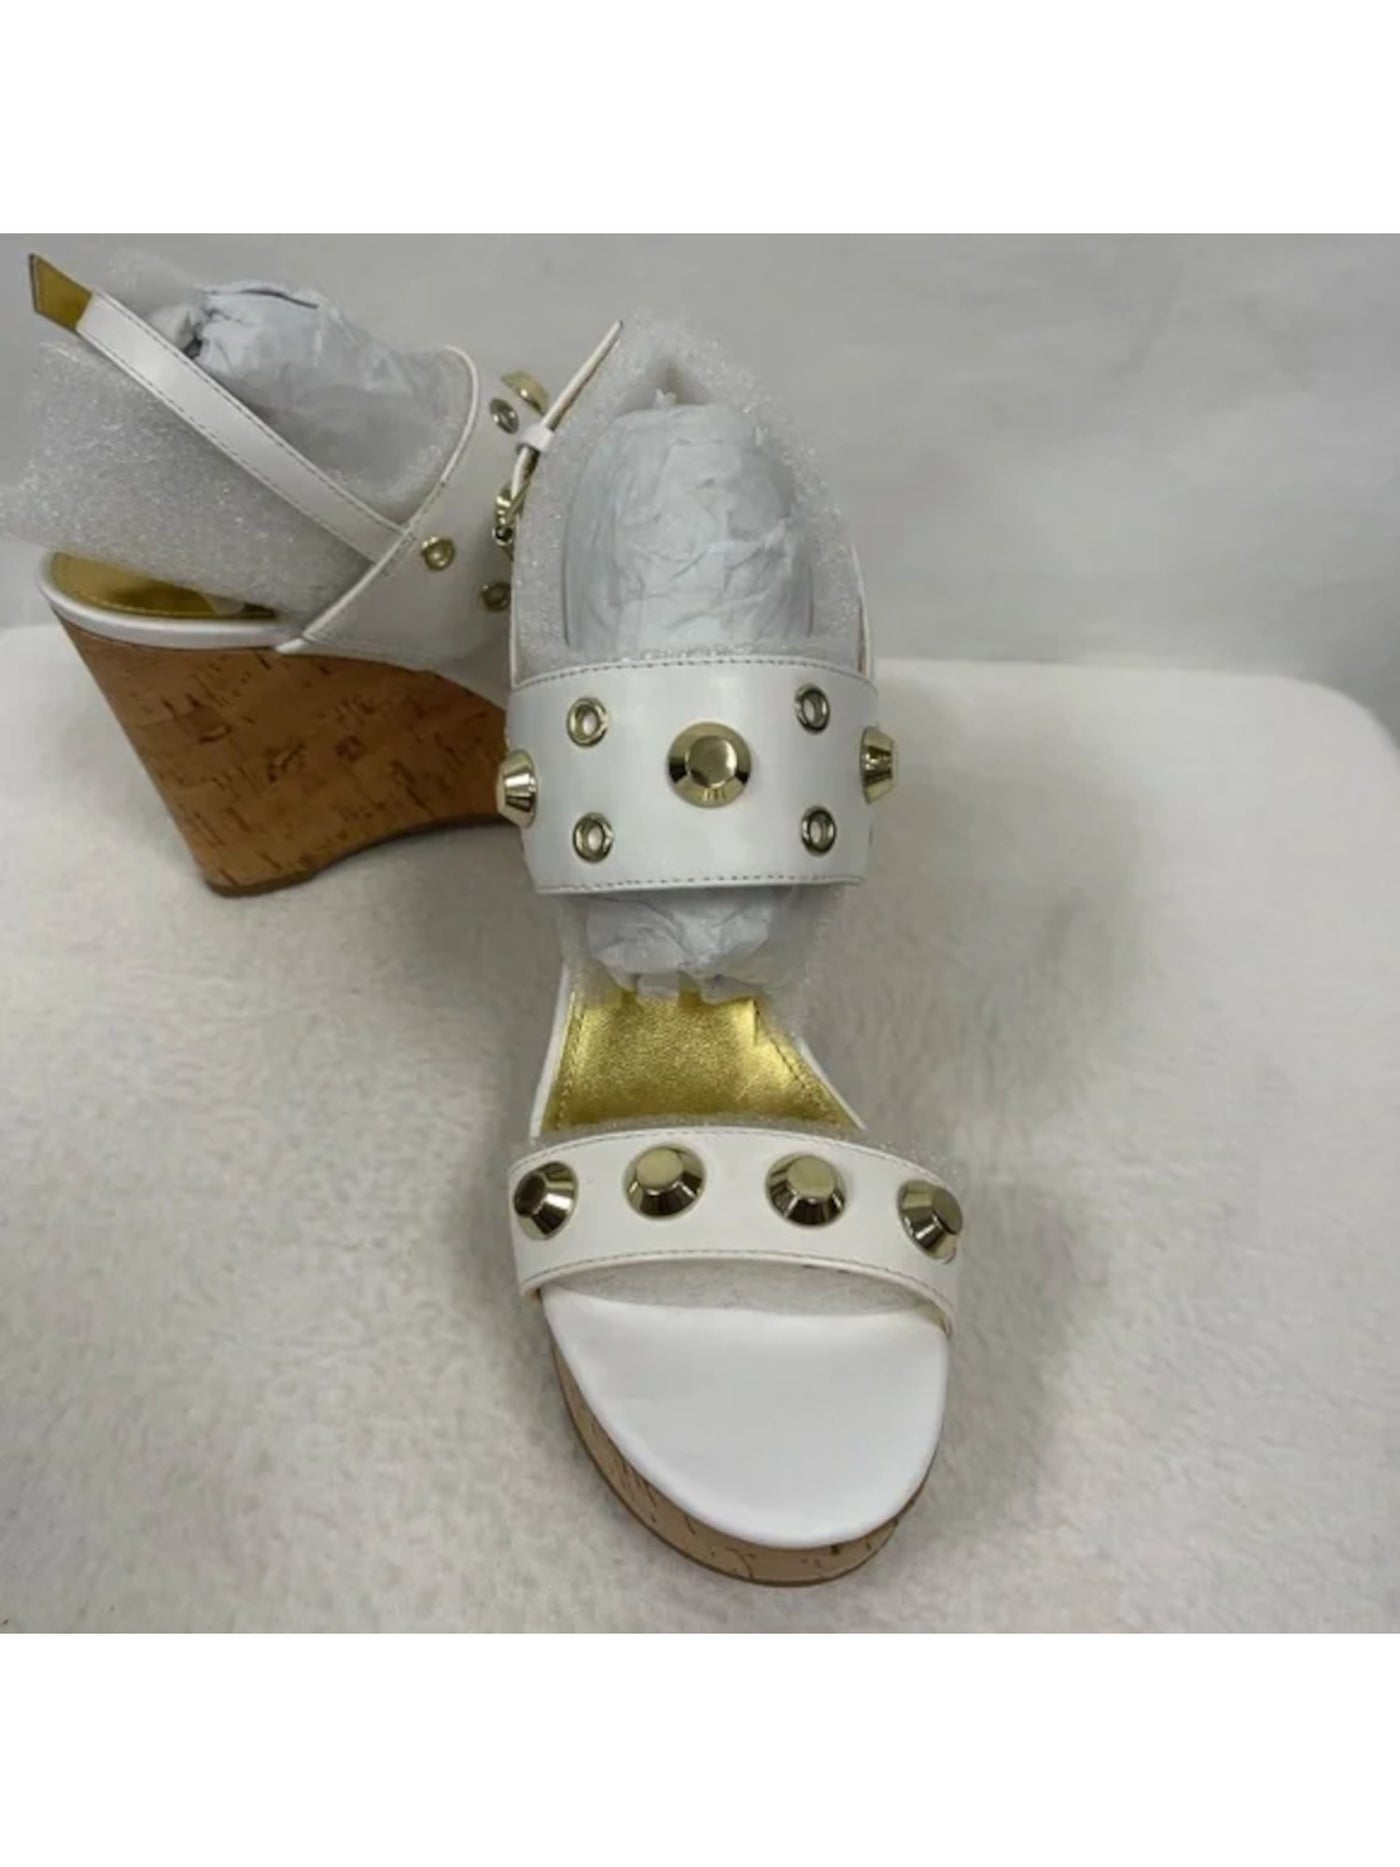 IVANKA TRUMP Womens White Gold-Tone Grommet And Studs Cork Lined 1 1/2" Platform Adjustable Strap Padded Gitty Round Toe Wedge Buckle Leather Sandals Shoes 7 M